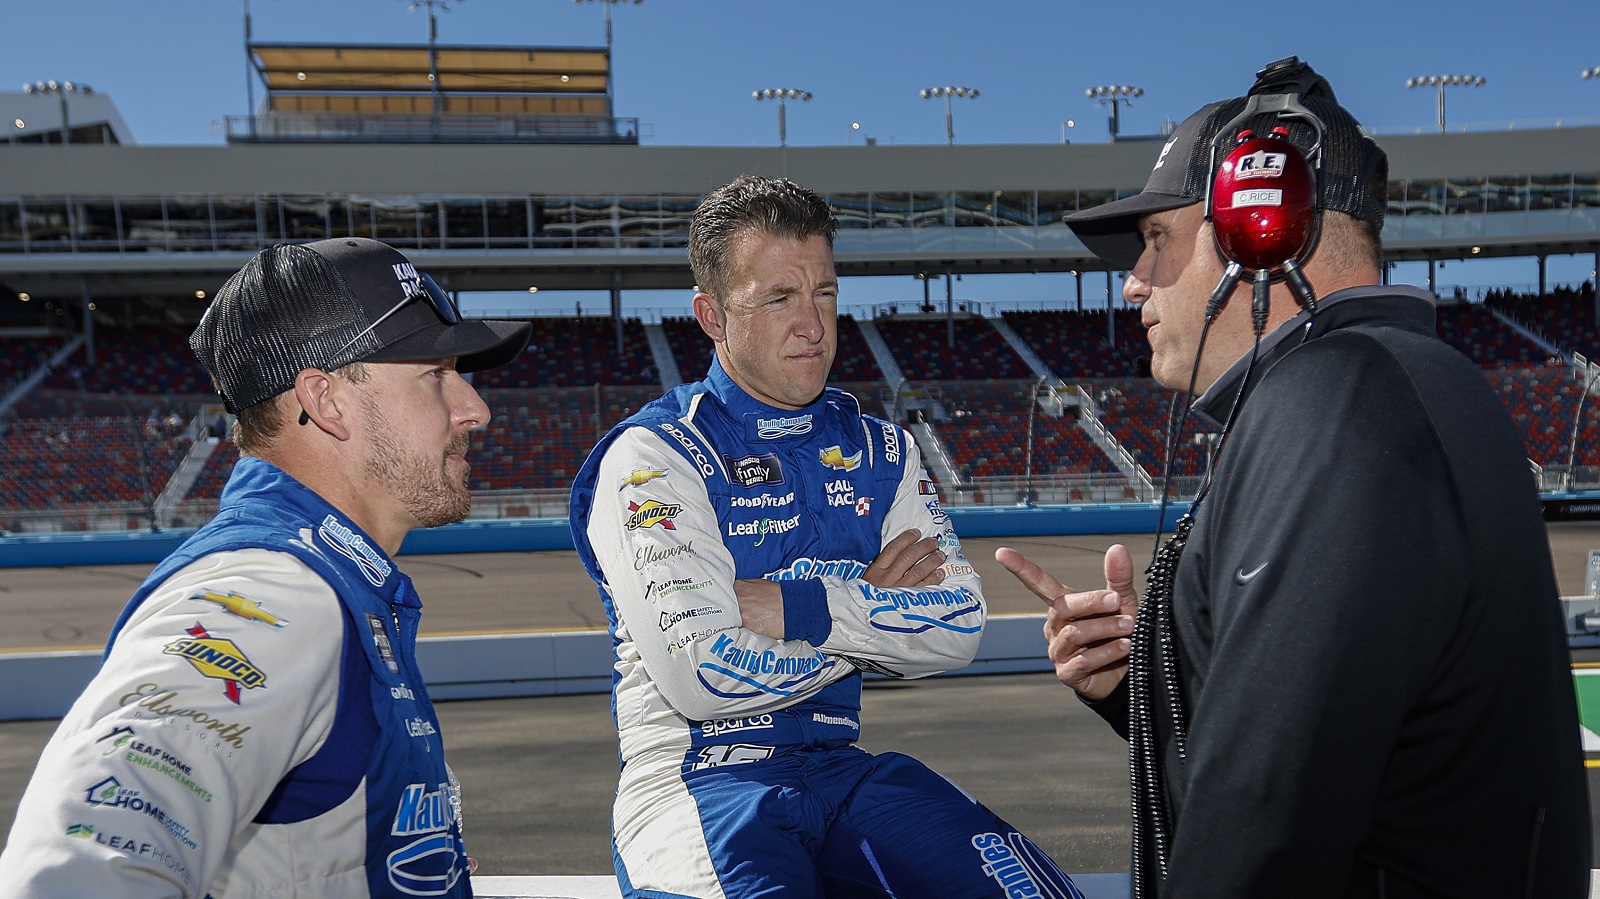 Drivers Daniel Hemric and AJ Allmendinger speak with and Chris Rice, president of Kaulig Racing, on the grid during qualifying for the NASCAR Xfinity Series United Rentals 200 at Phoenix Raceway on March 12, 2022.